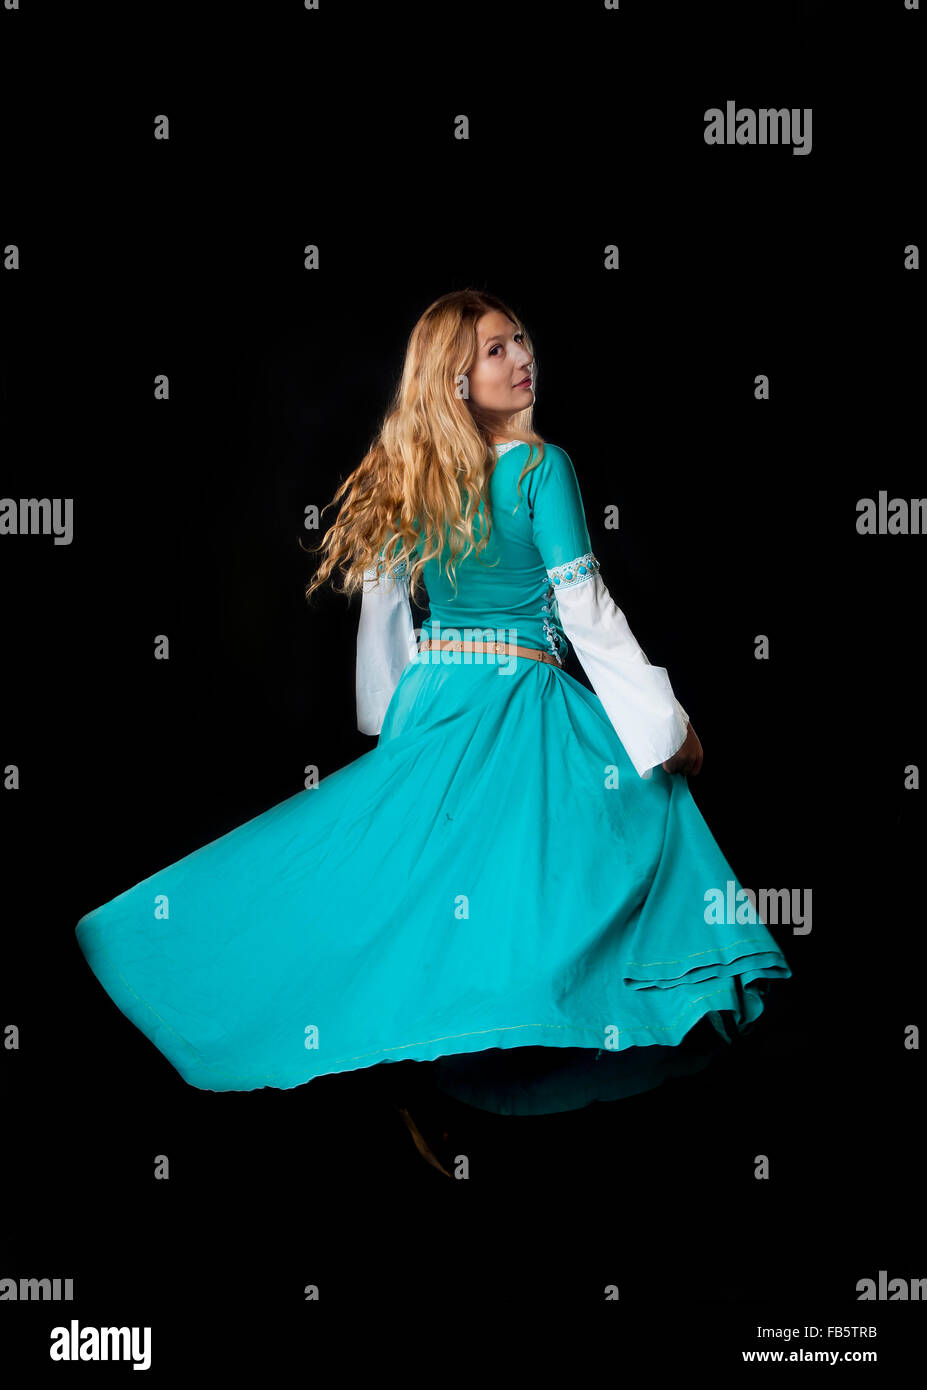 Studio shot of young beautiful girl dancing in a turquoise medieval costume dress (on black background) Stock Photo